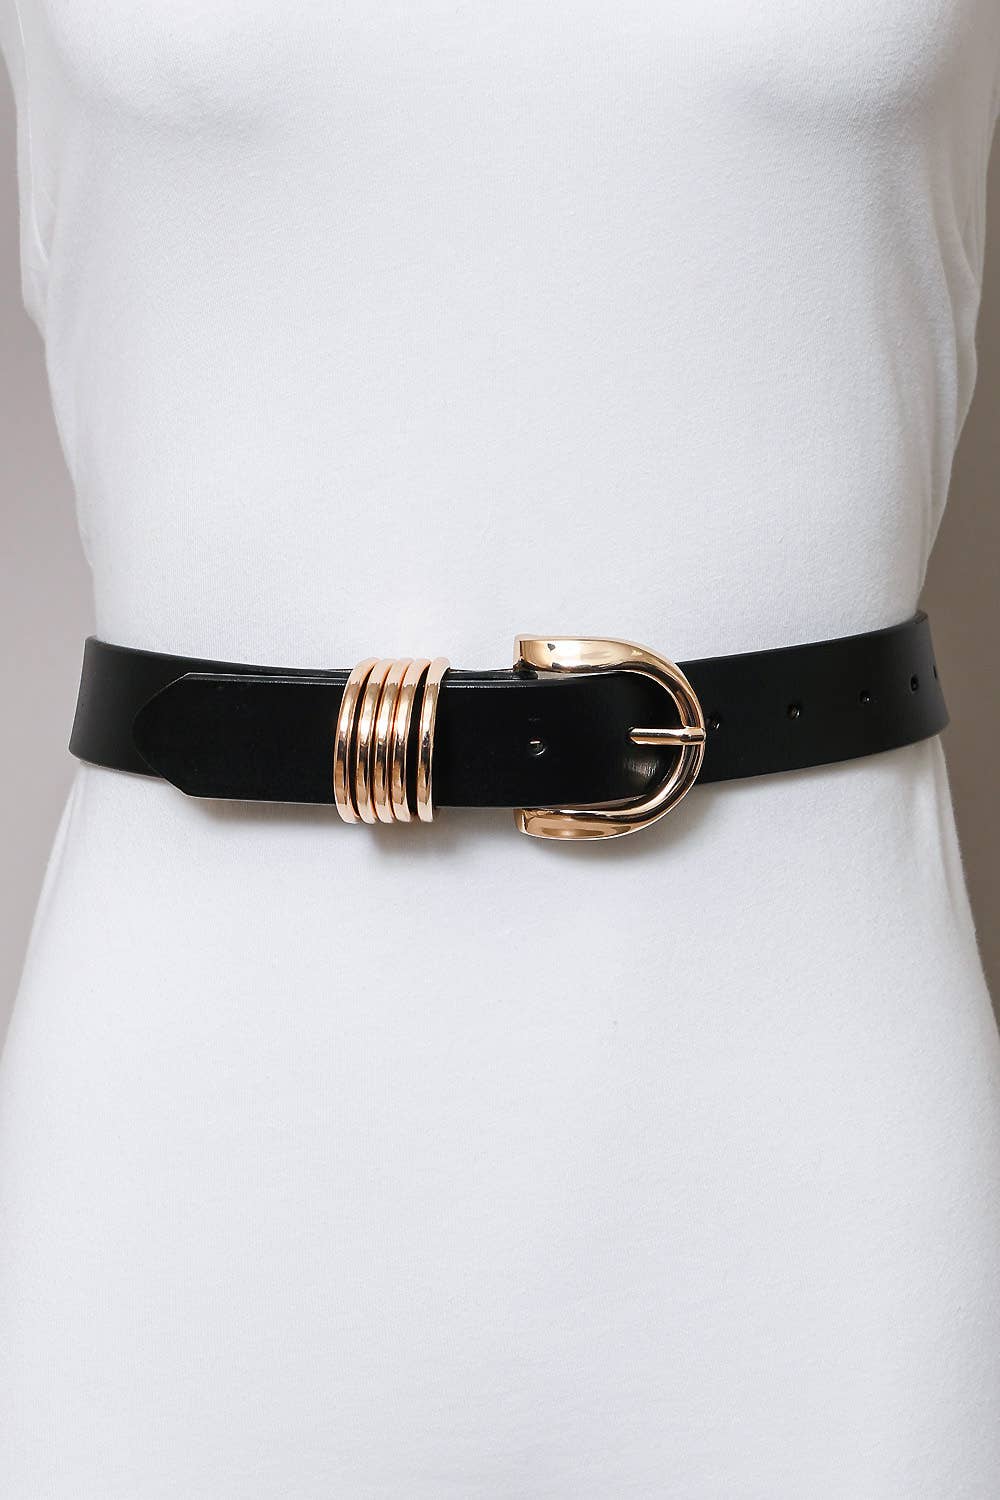 Gold Buckle Belt: Taupe and Black